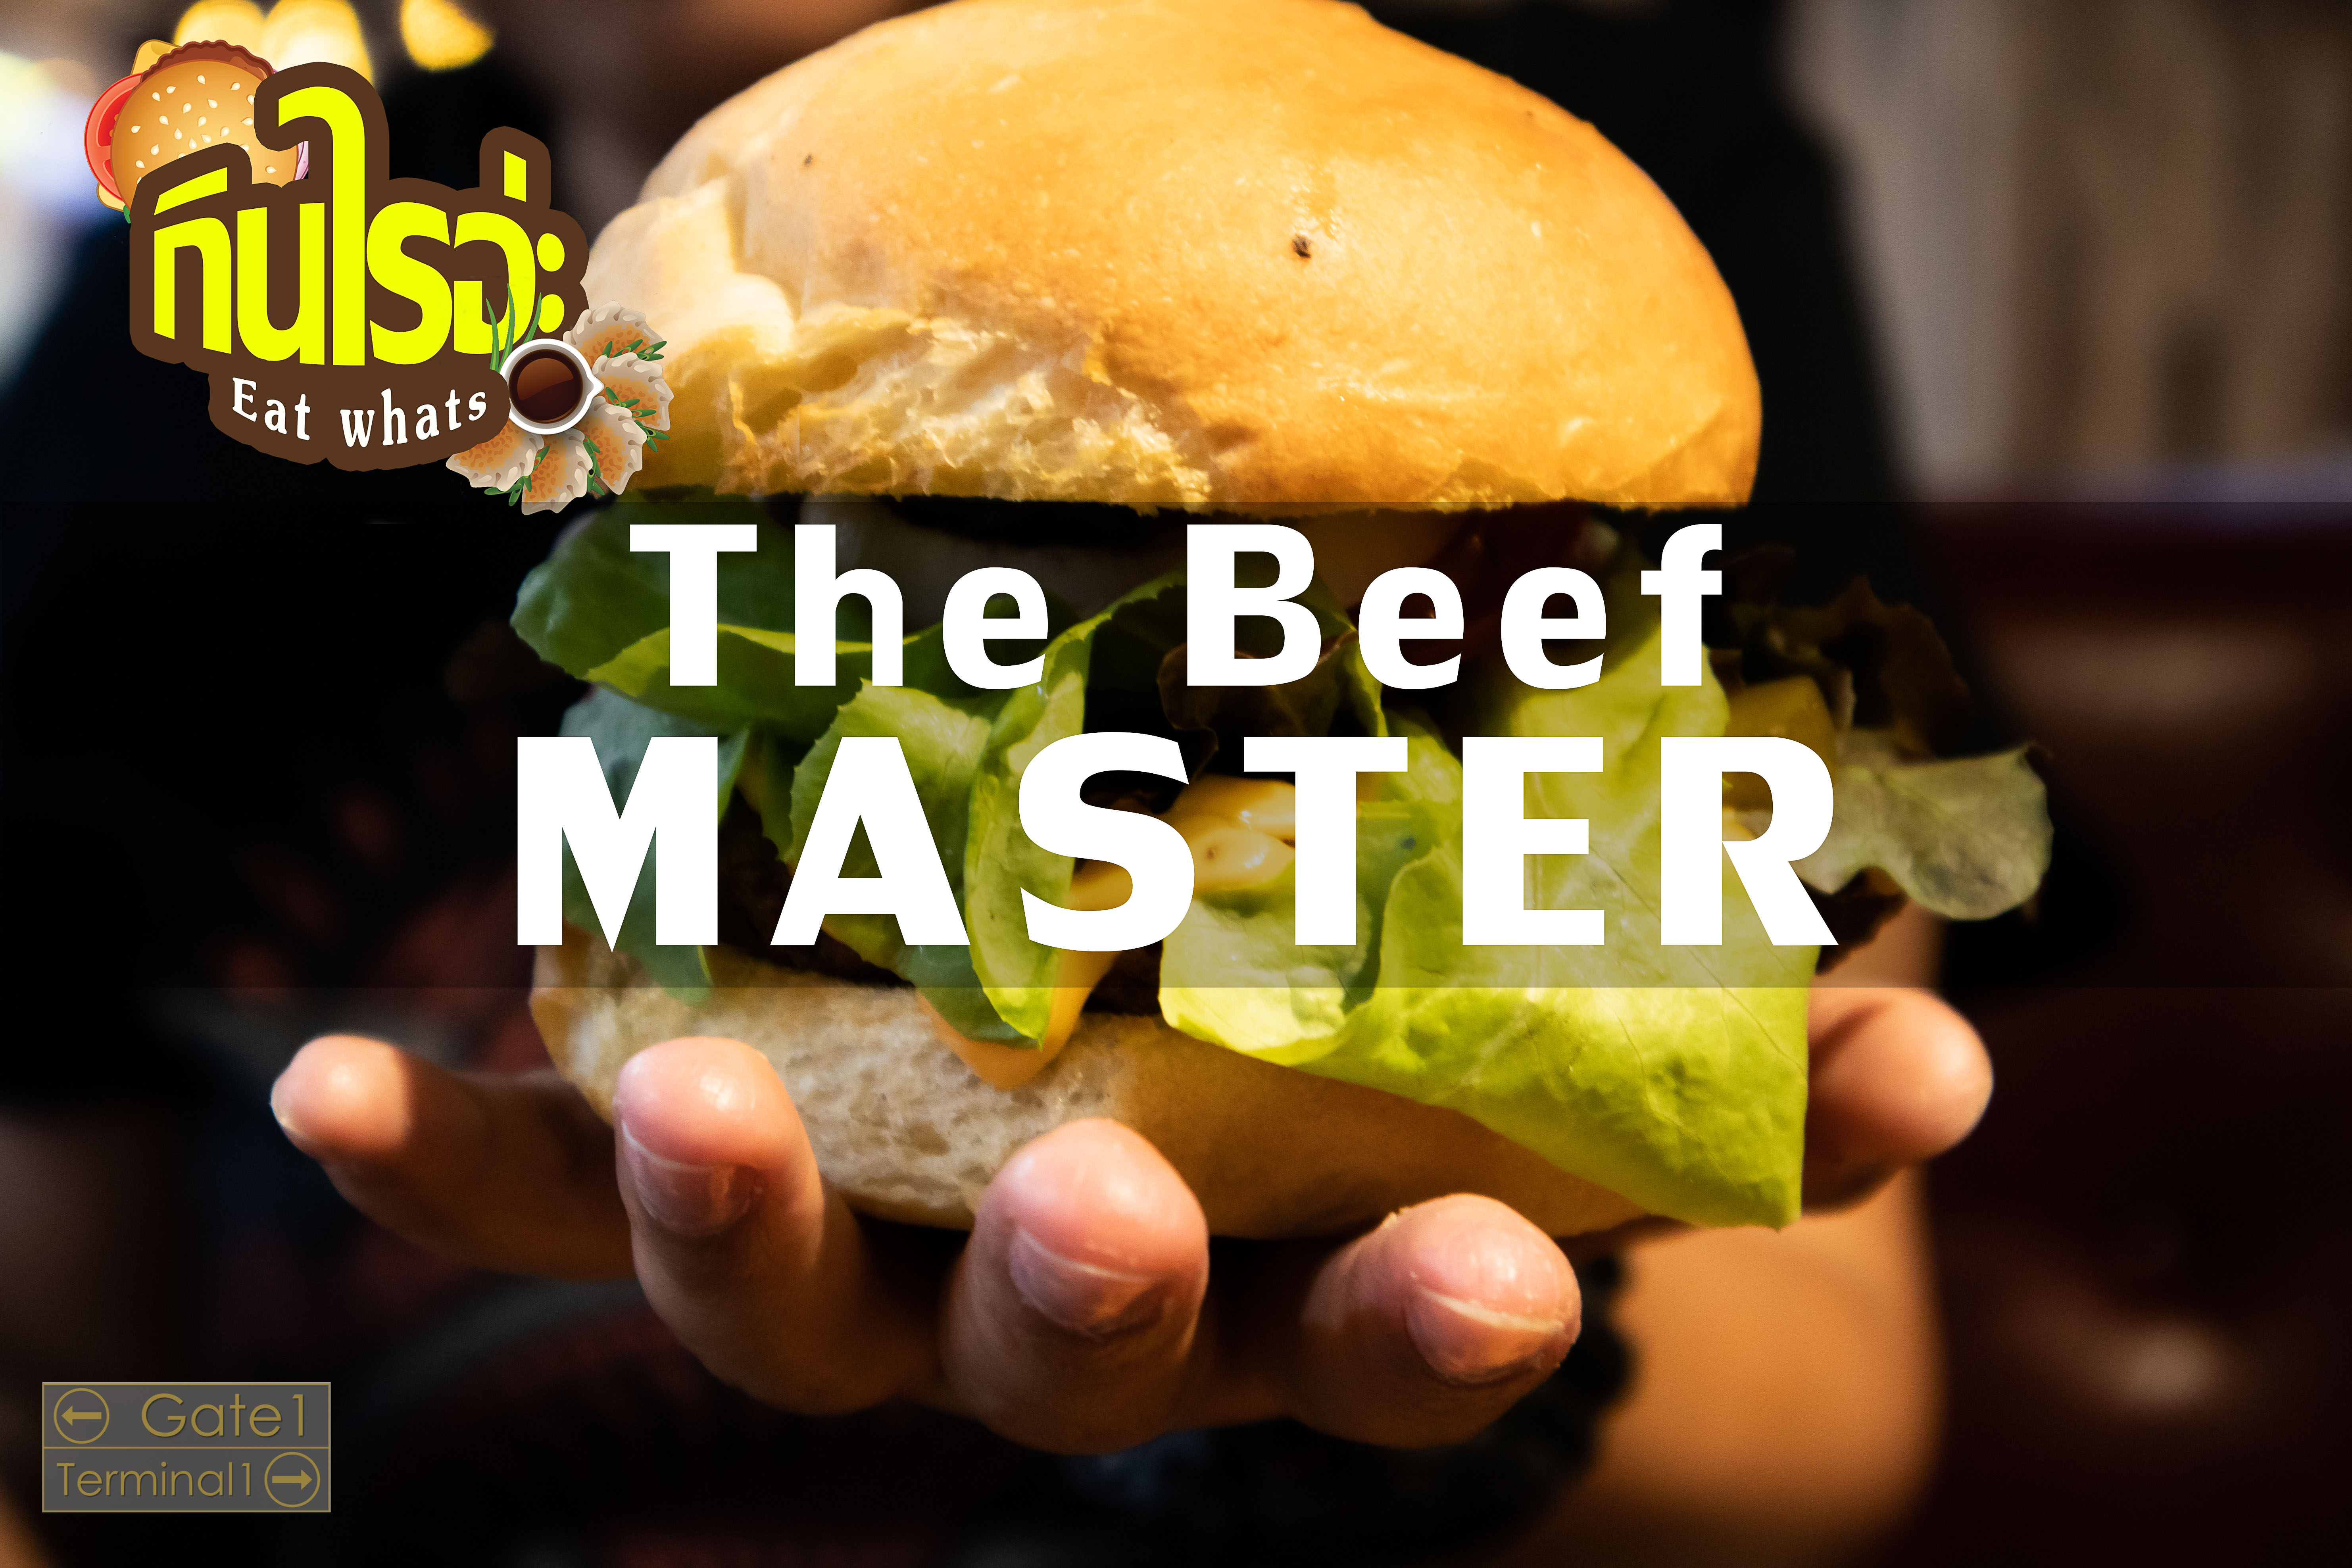 Review The Beef Master by The company B